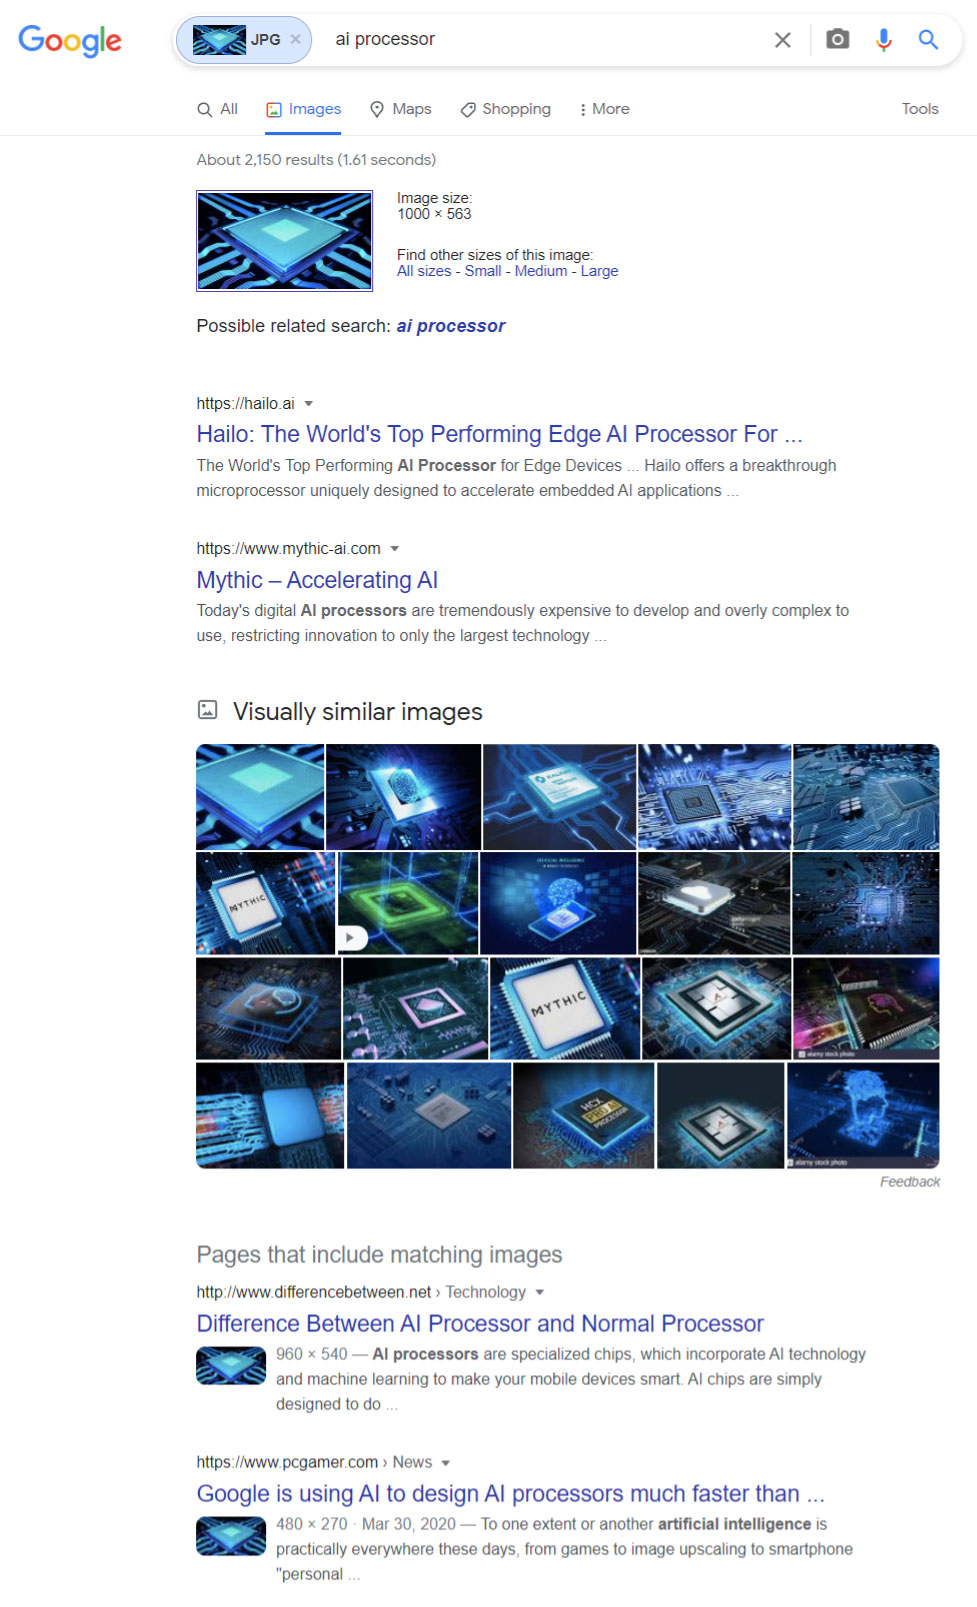 Reverse Image Search in Google: How To Look Up Images